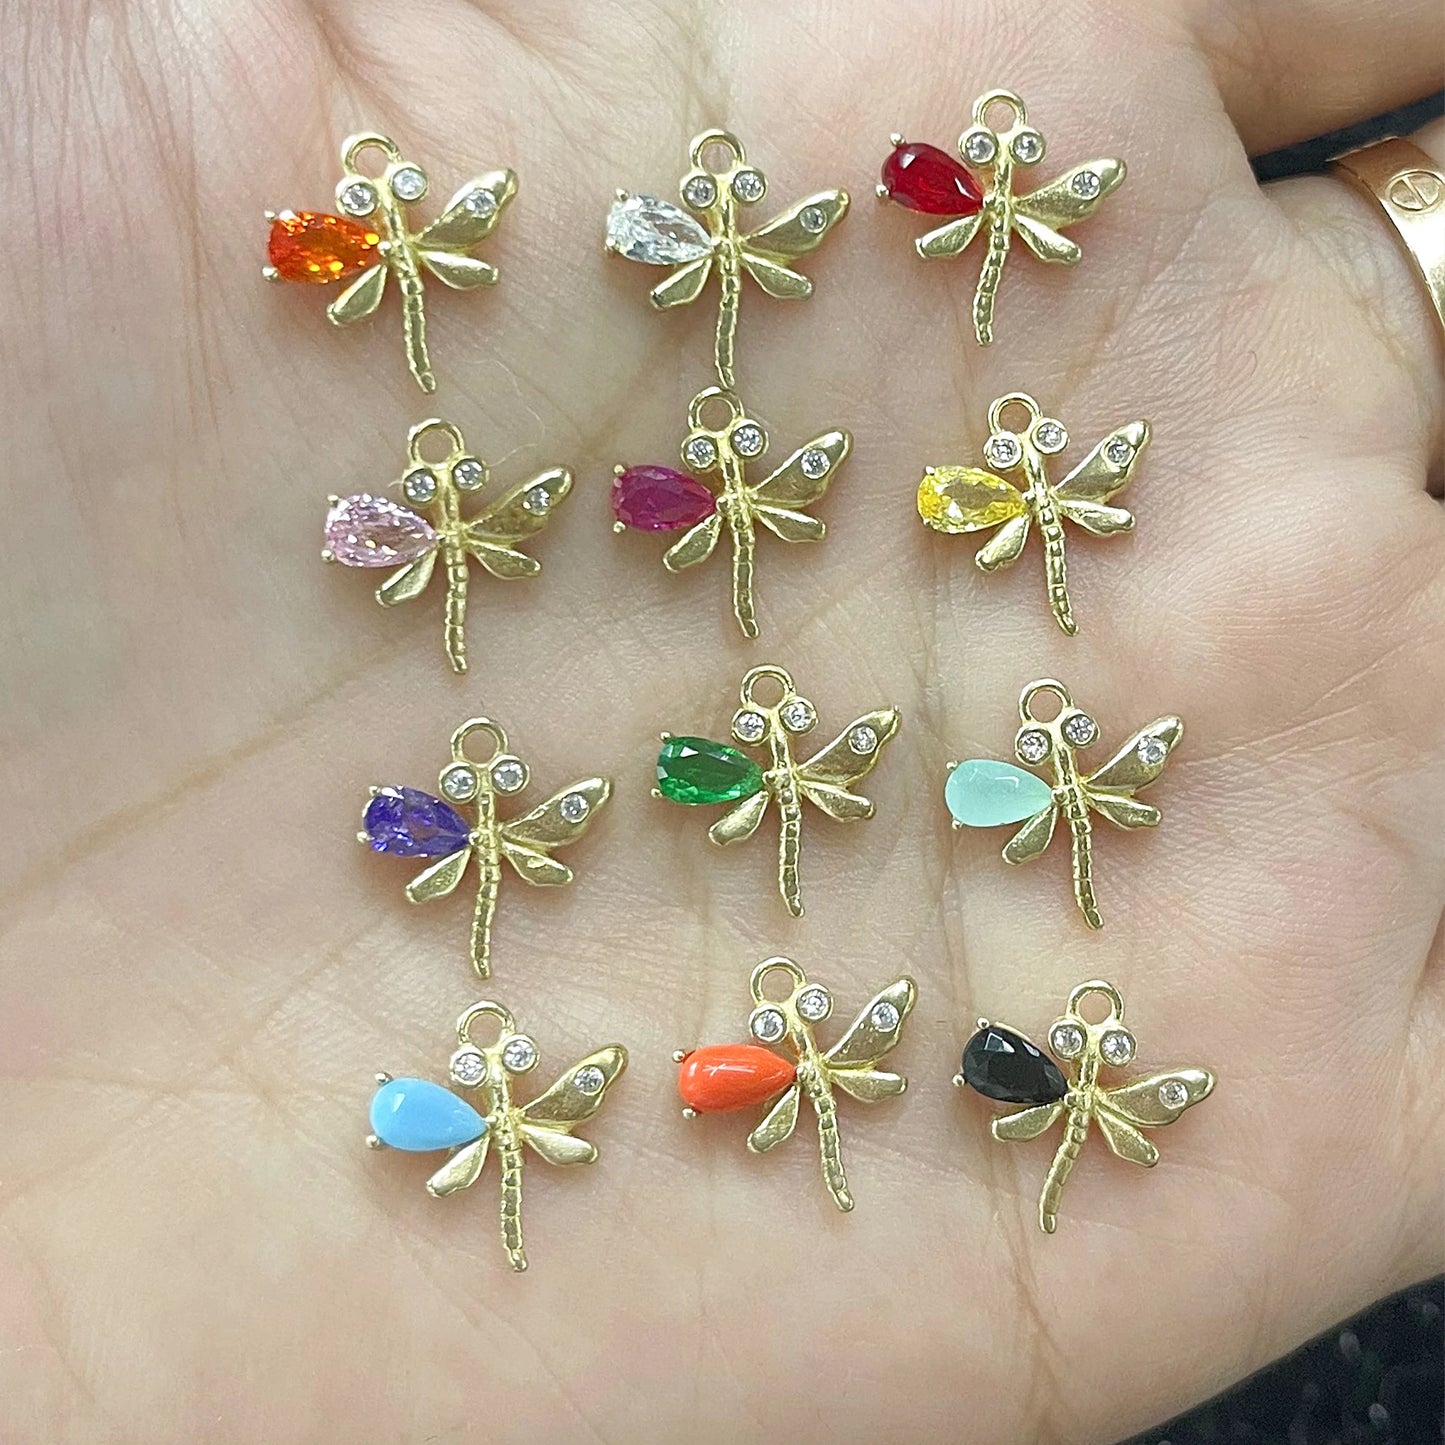 GUFEATHER ME36,jewelry accessories,18k gold plated,copper,zircons,dragonfly shape,charms,jewelry making,diy pendants,10pcs/lot